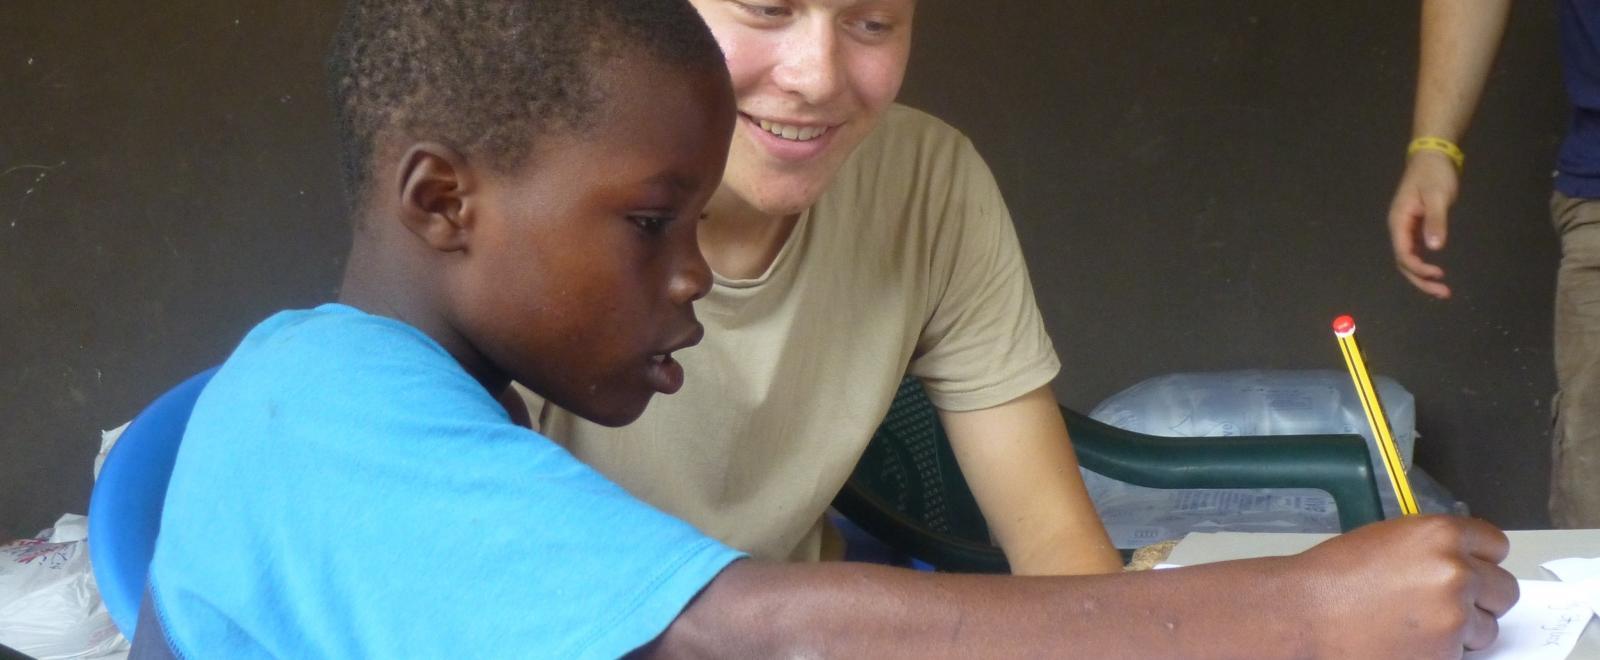 A volunteer teaching in Africa helps a child with a homework assignment at a placement in Ghana, Africa. 